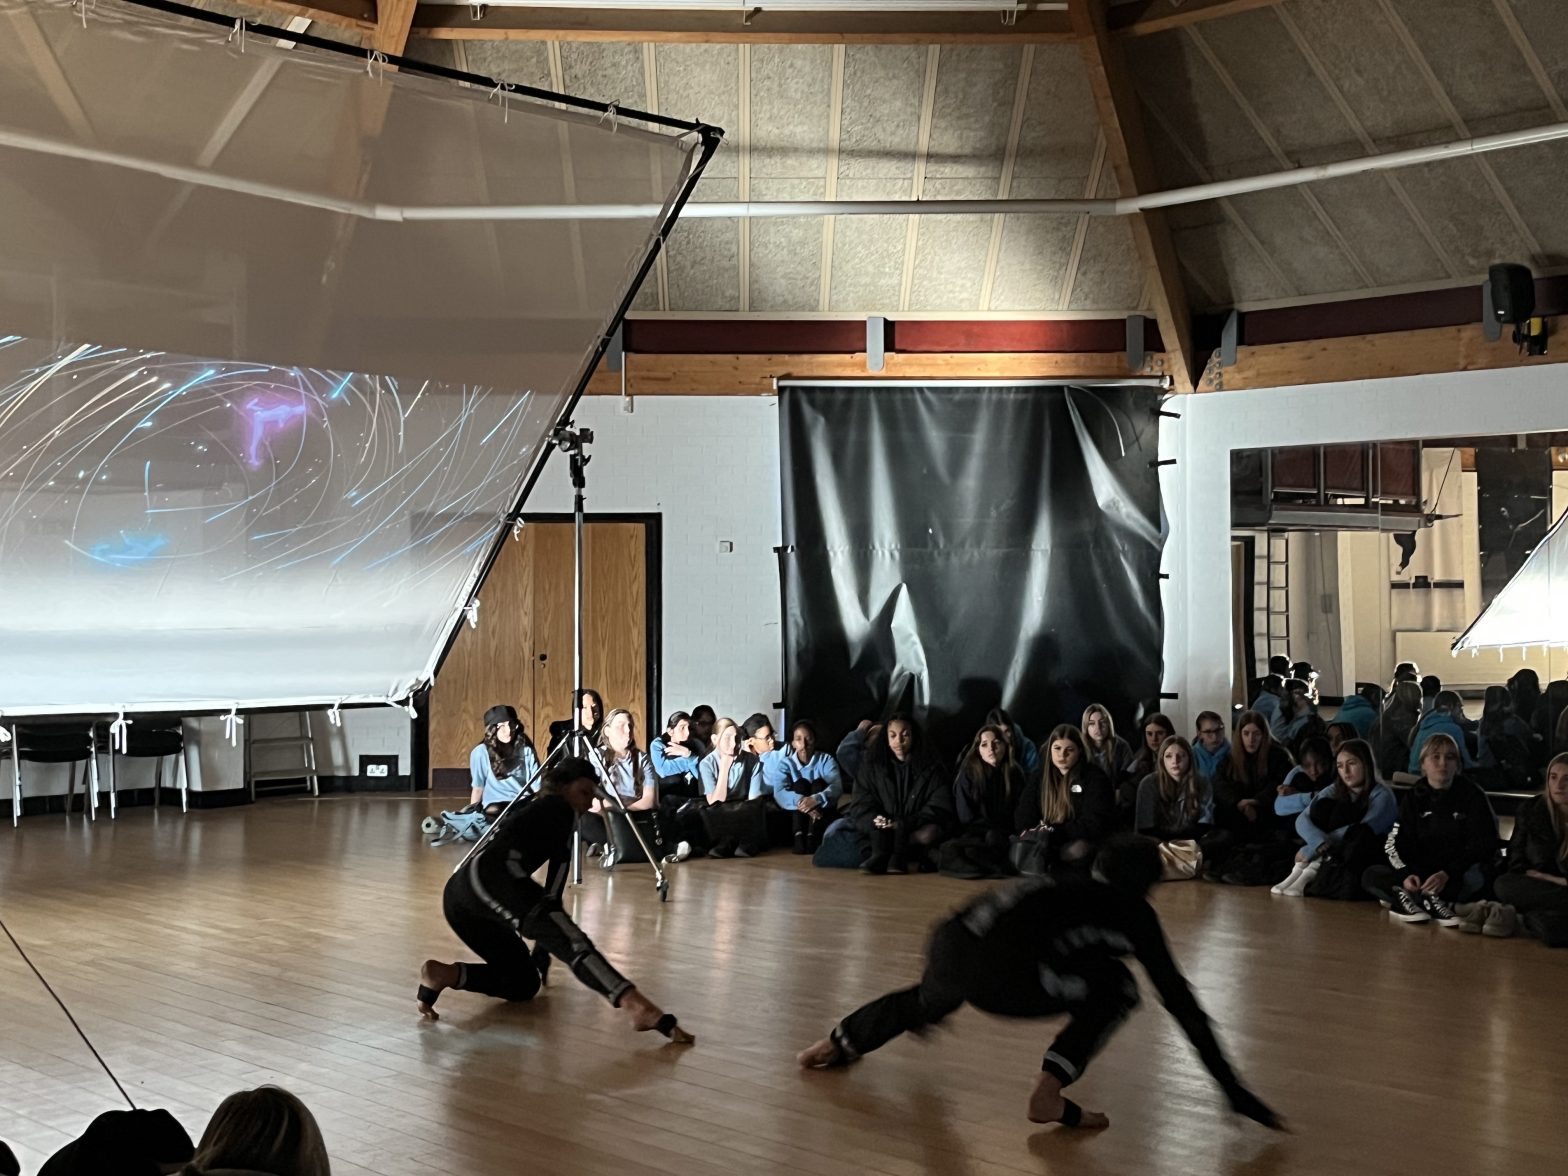 School children sit watching a motion capture dance performance with a large screen.